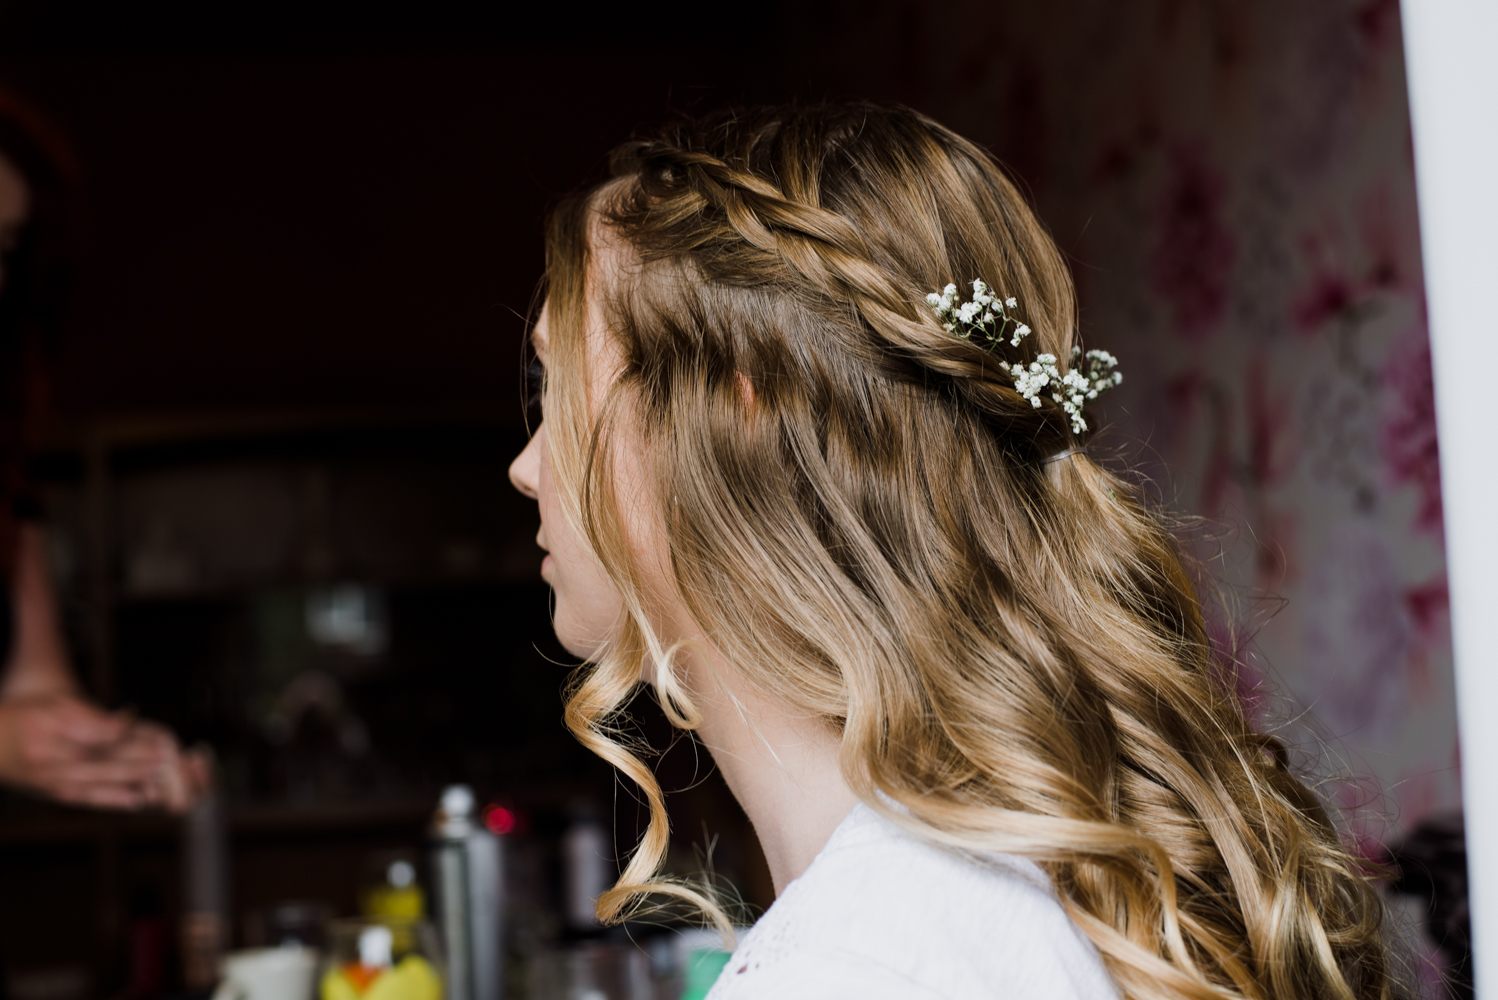 A detail photo of one of the bridesmaids hair